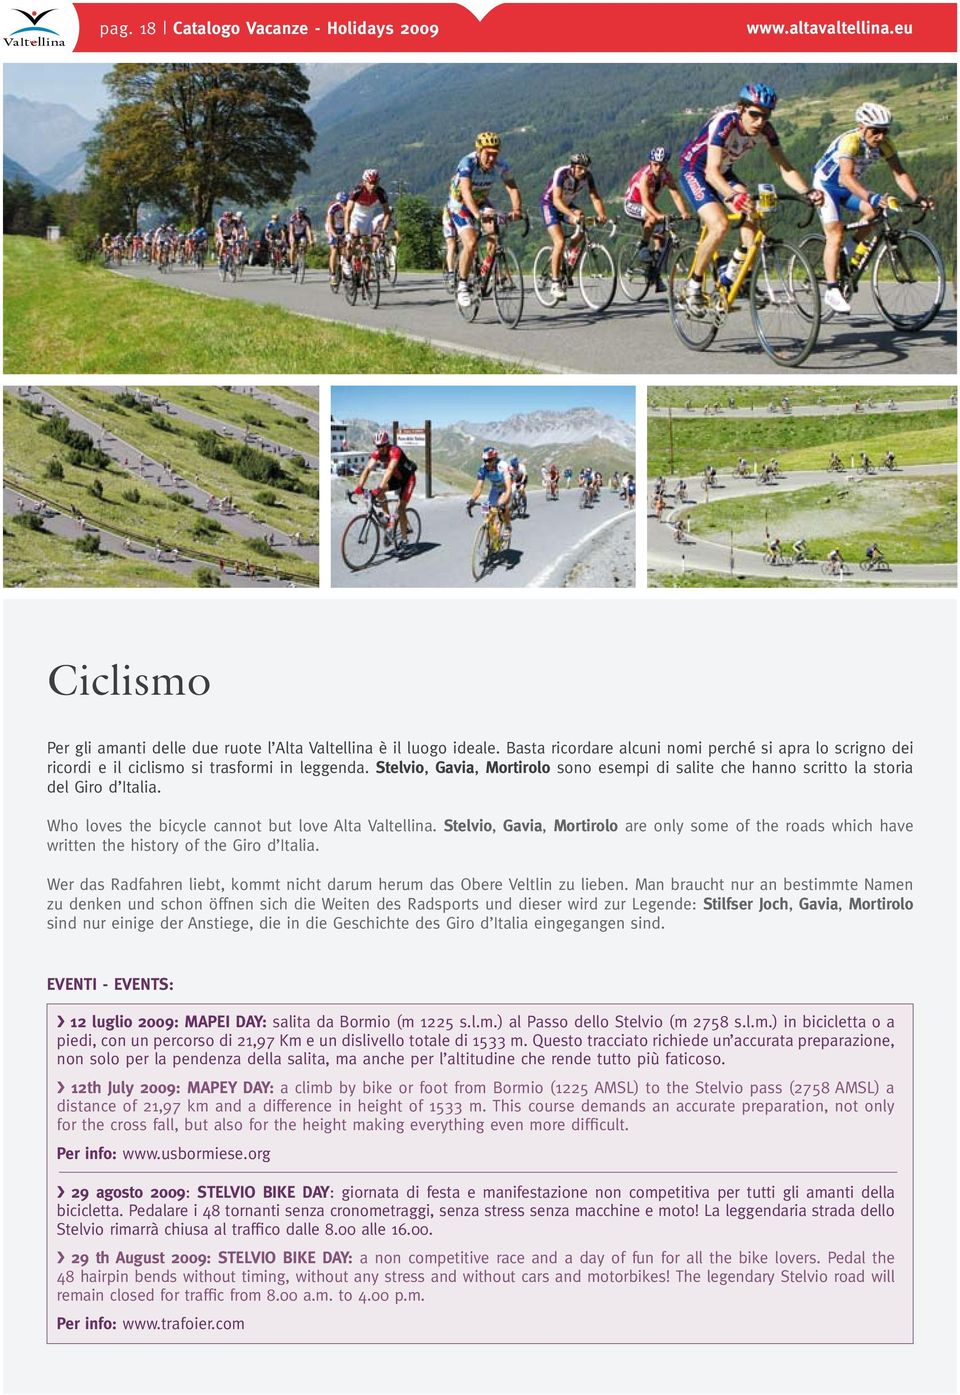 Who loves the bicycle cannot but love Alta Valtellina. Stelvio, Gavia, Mortirolo are only some of the roads which have written the history of the Giro d Italia.